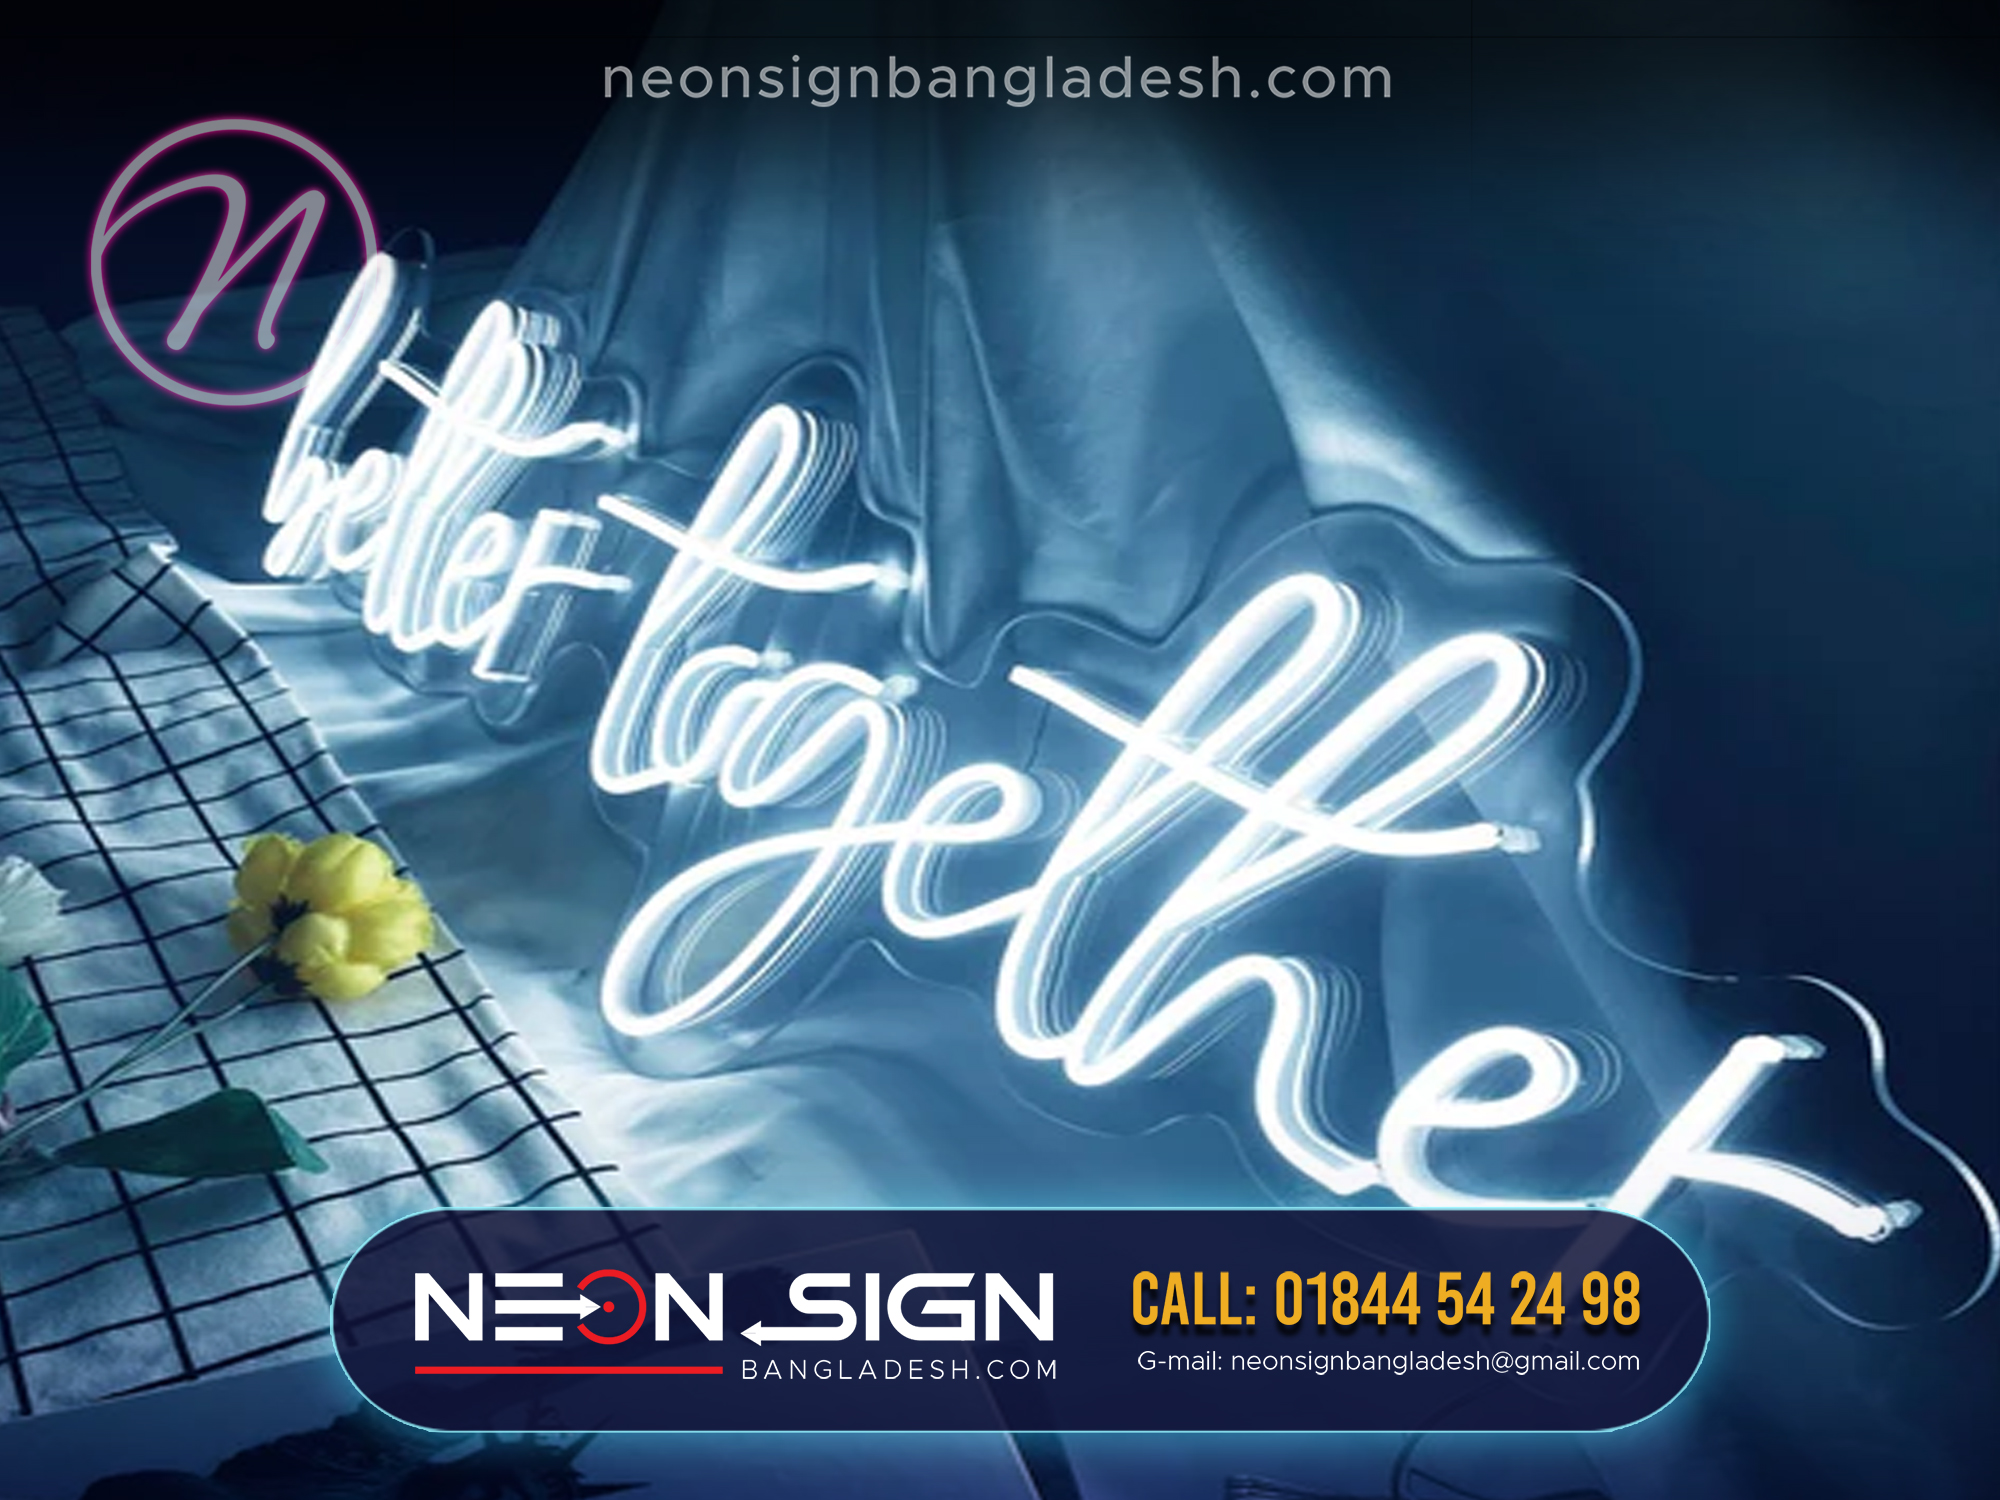 Neon Sign Name Plate for Shop Advertising